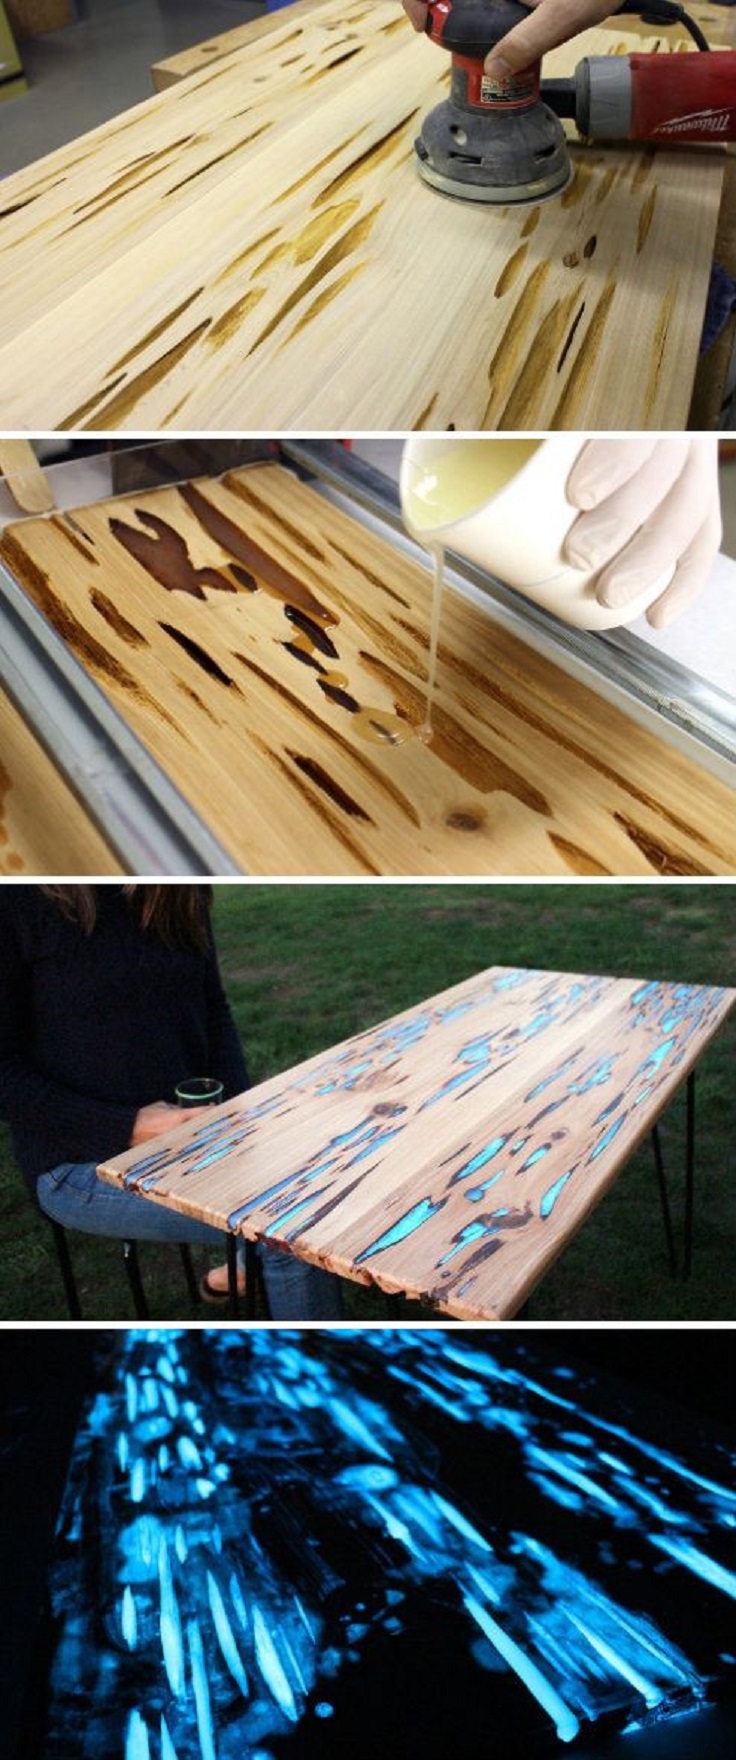 Top 10 Creative DIY Woodwork Projects - Top Inspired